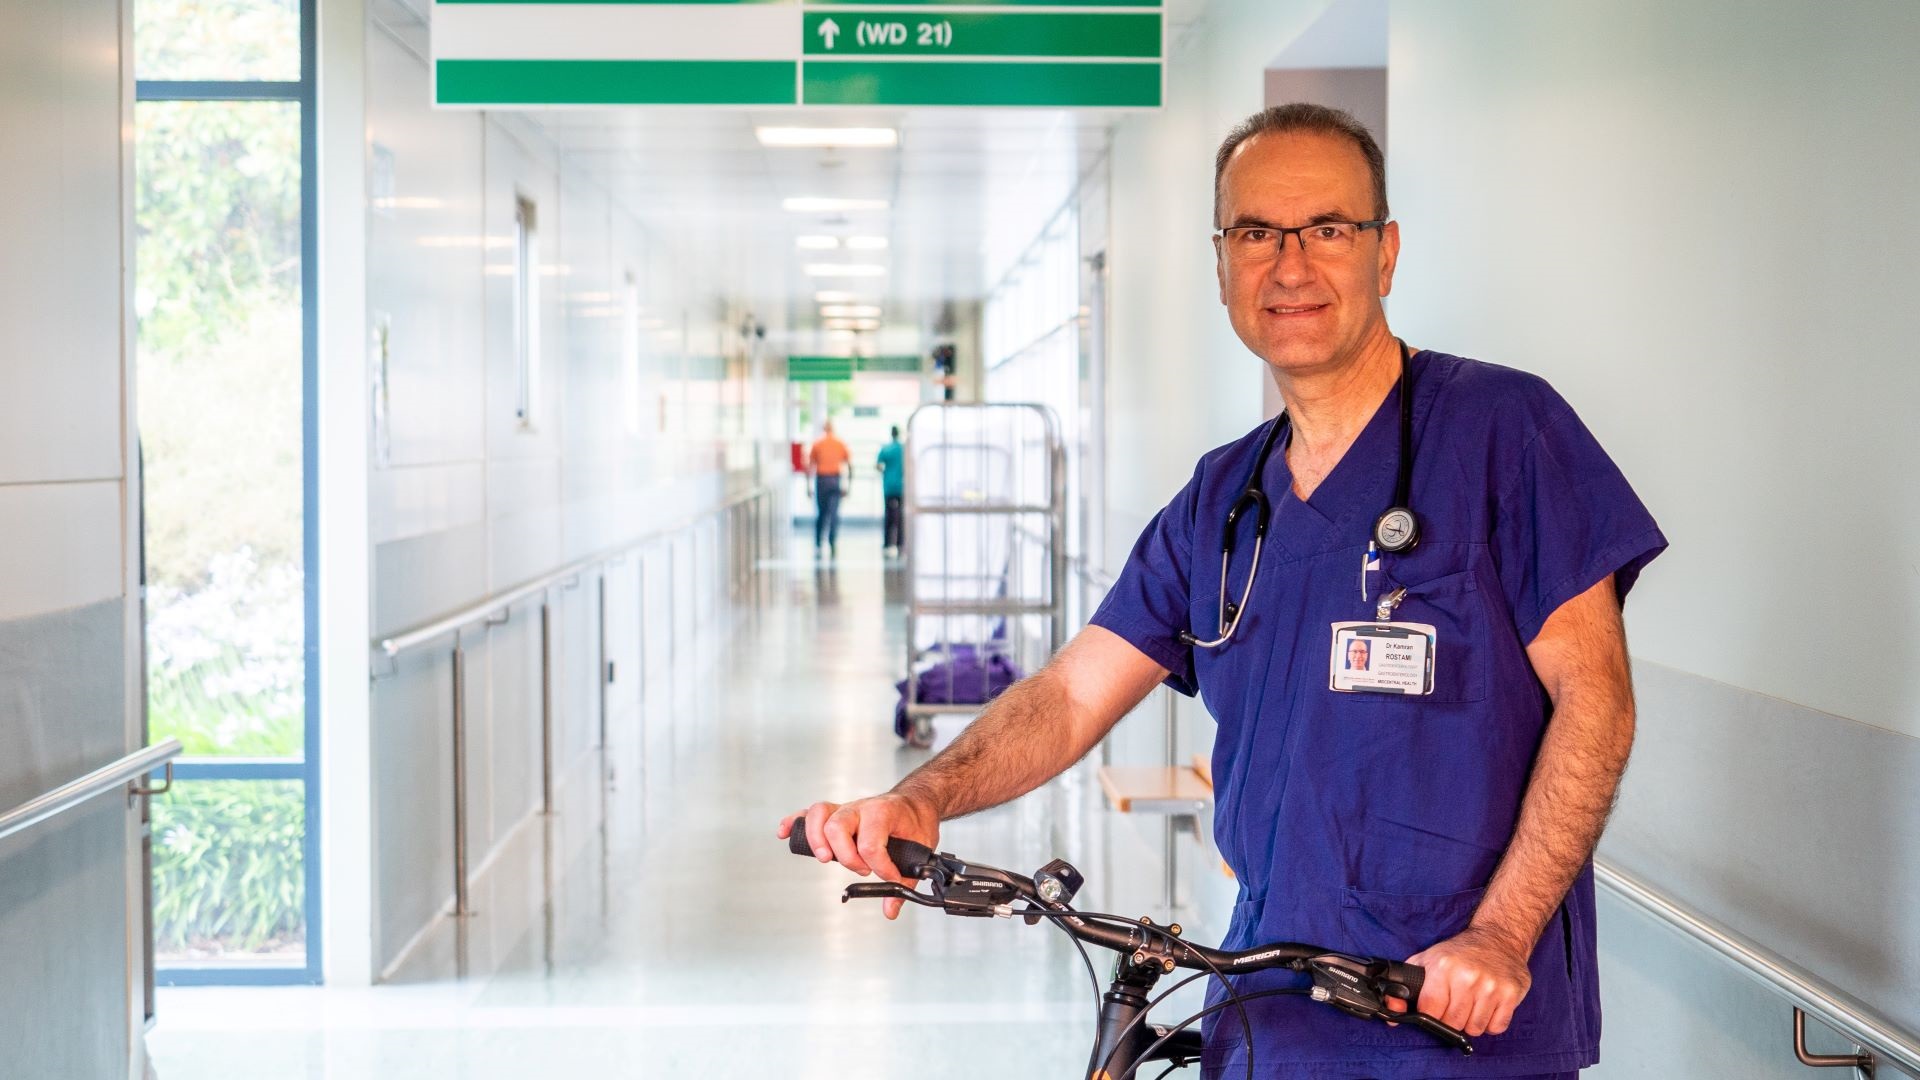 Photo shows man in hospital scrubs with stethoscope around his neck, posing with bike in a hospital corridor.